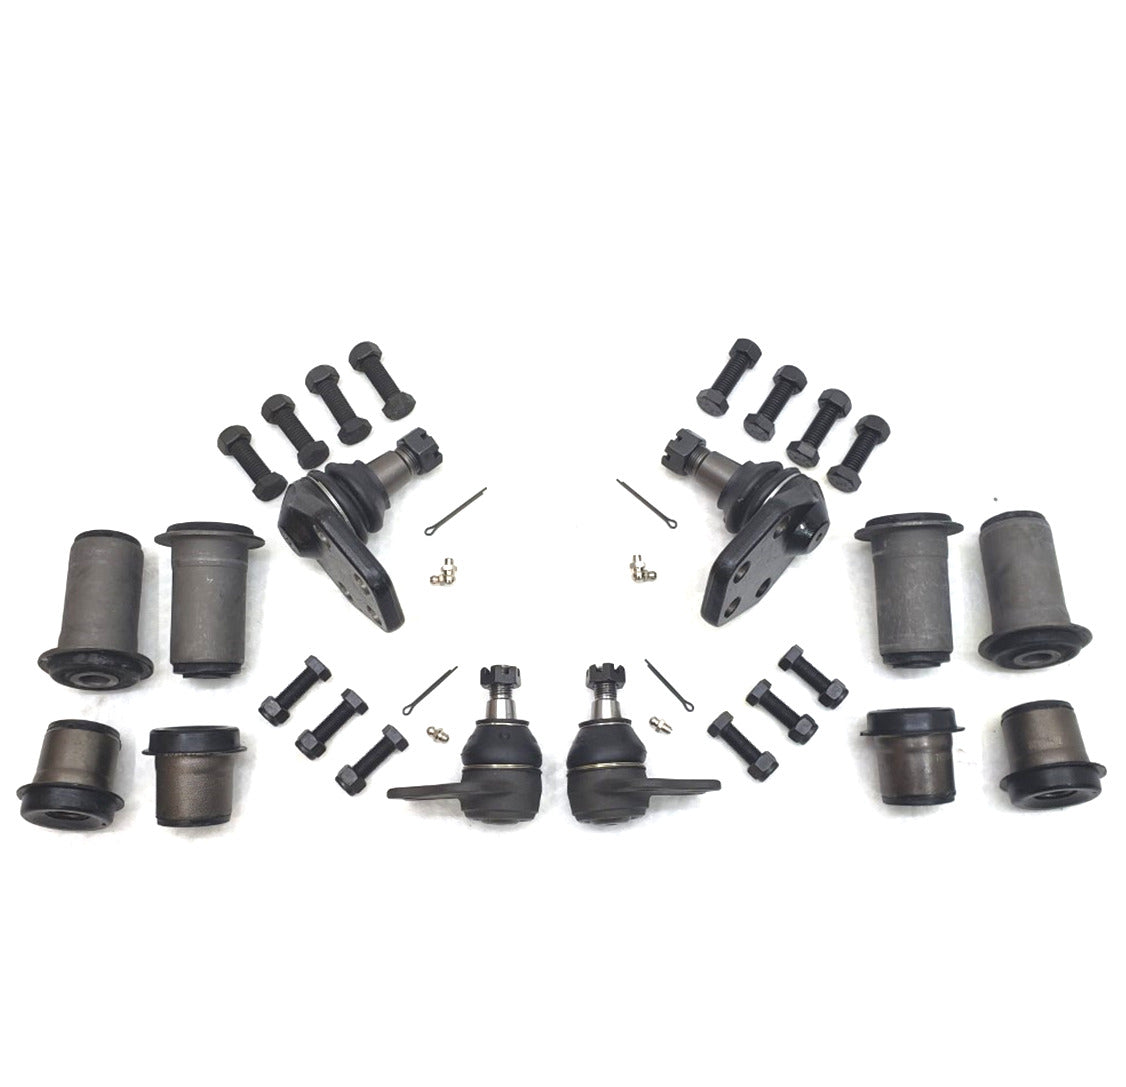 HD Ball Joint Control Arm Bush Suspension Kit for 2000-2002 Dodge Ram 2500, 3500 2WD